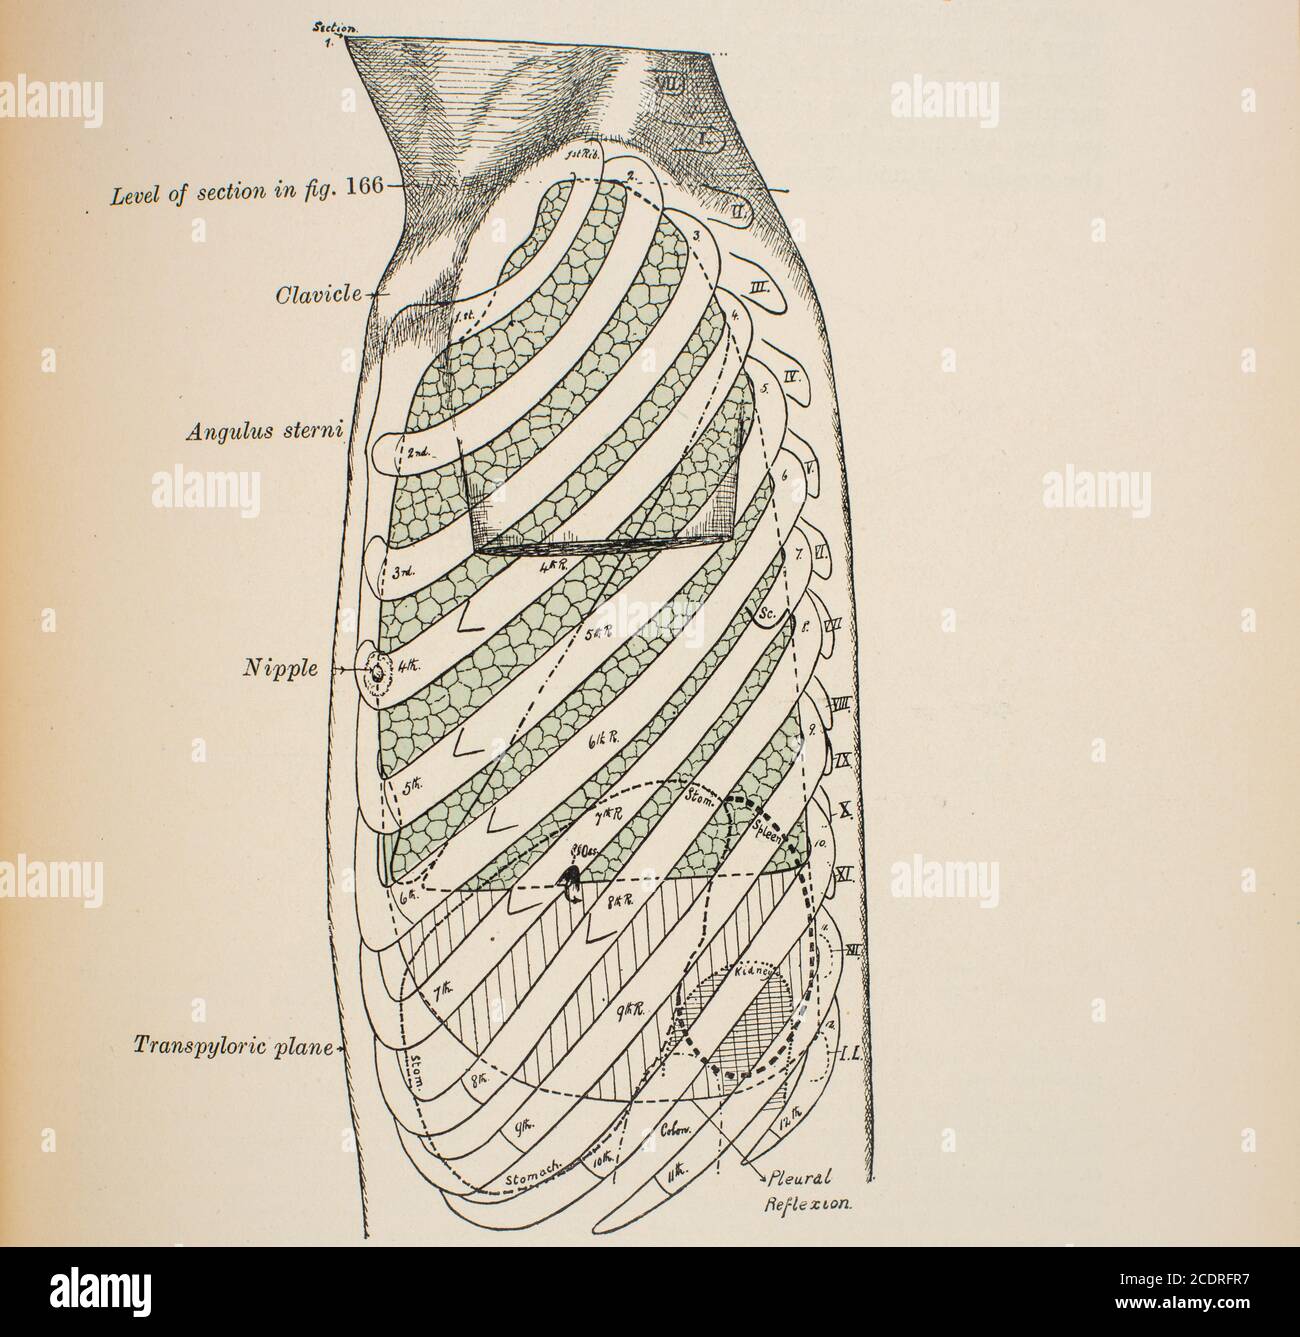 Quain's Elements of Anatomy Col. III published in 1896, lateral view of the thorax. Stock Photo